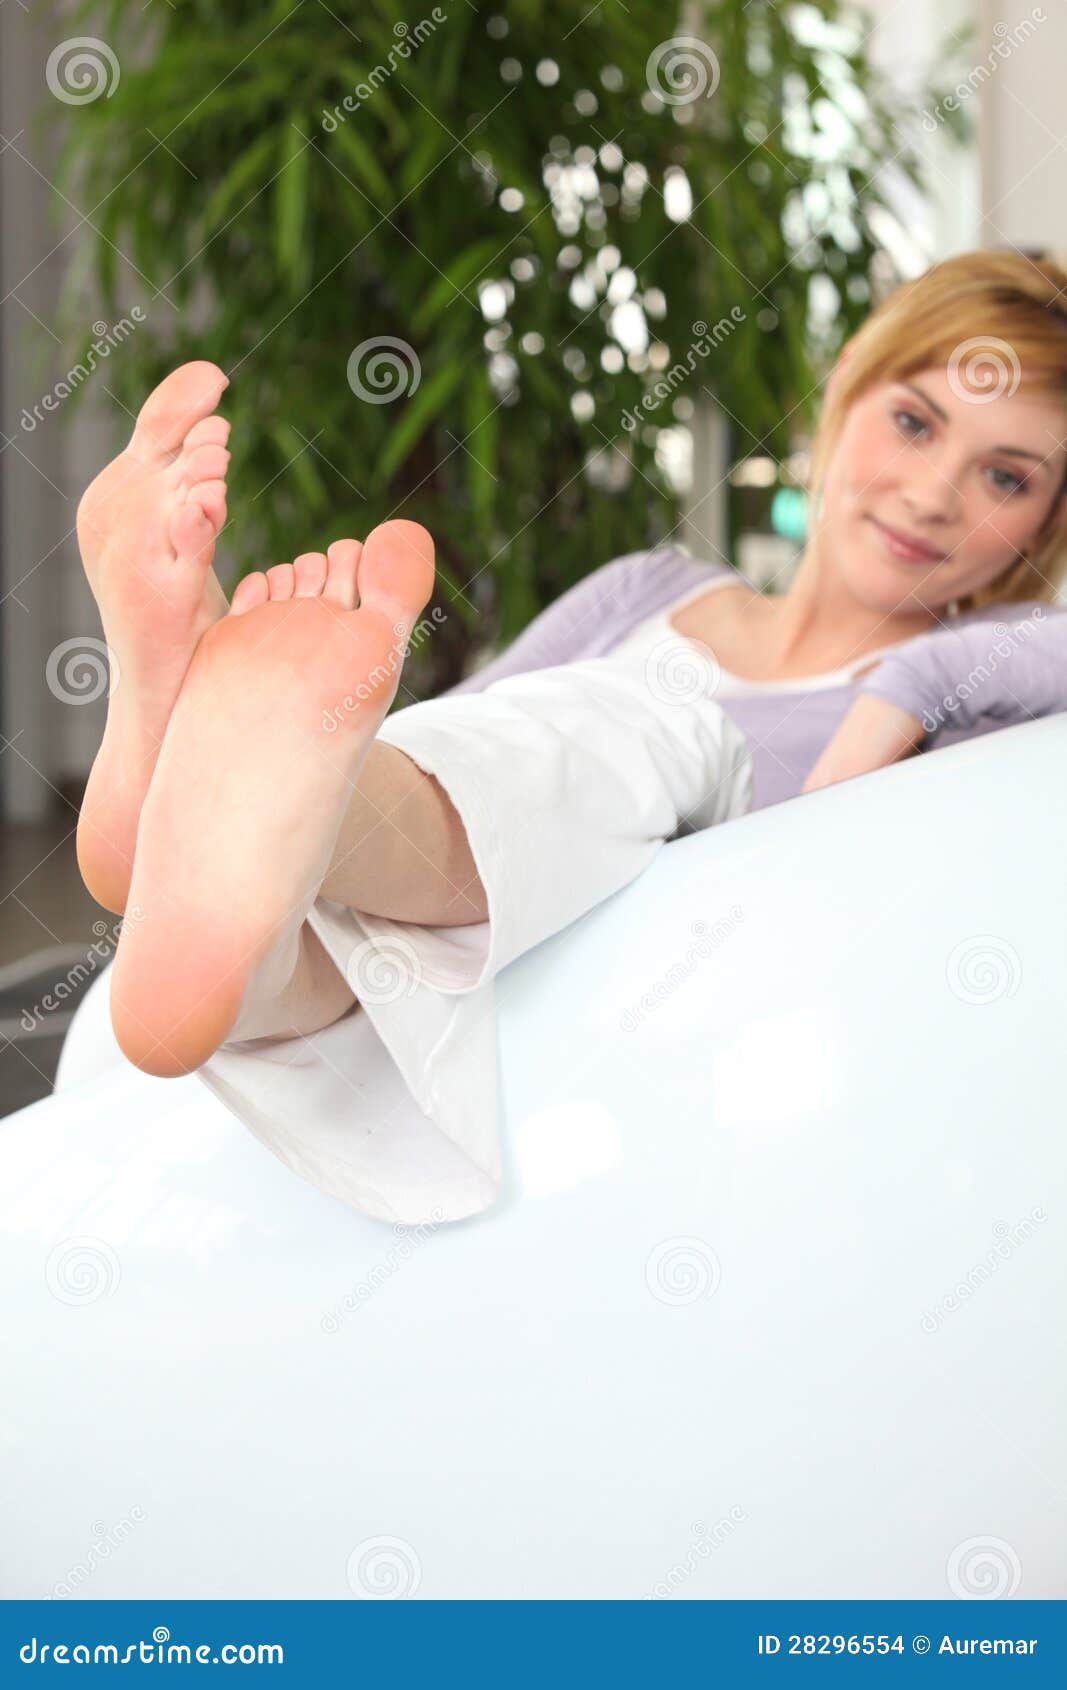 cate perkins recommends Sexy Blonde Feet